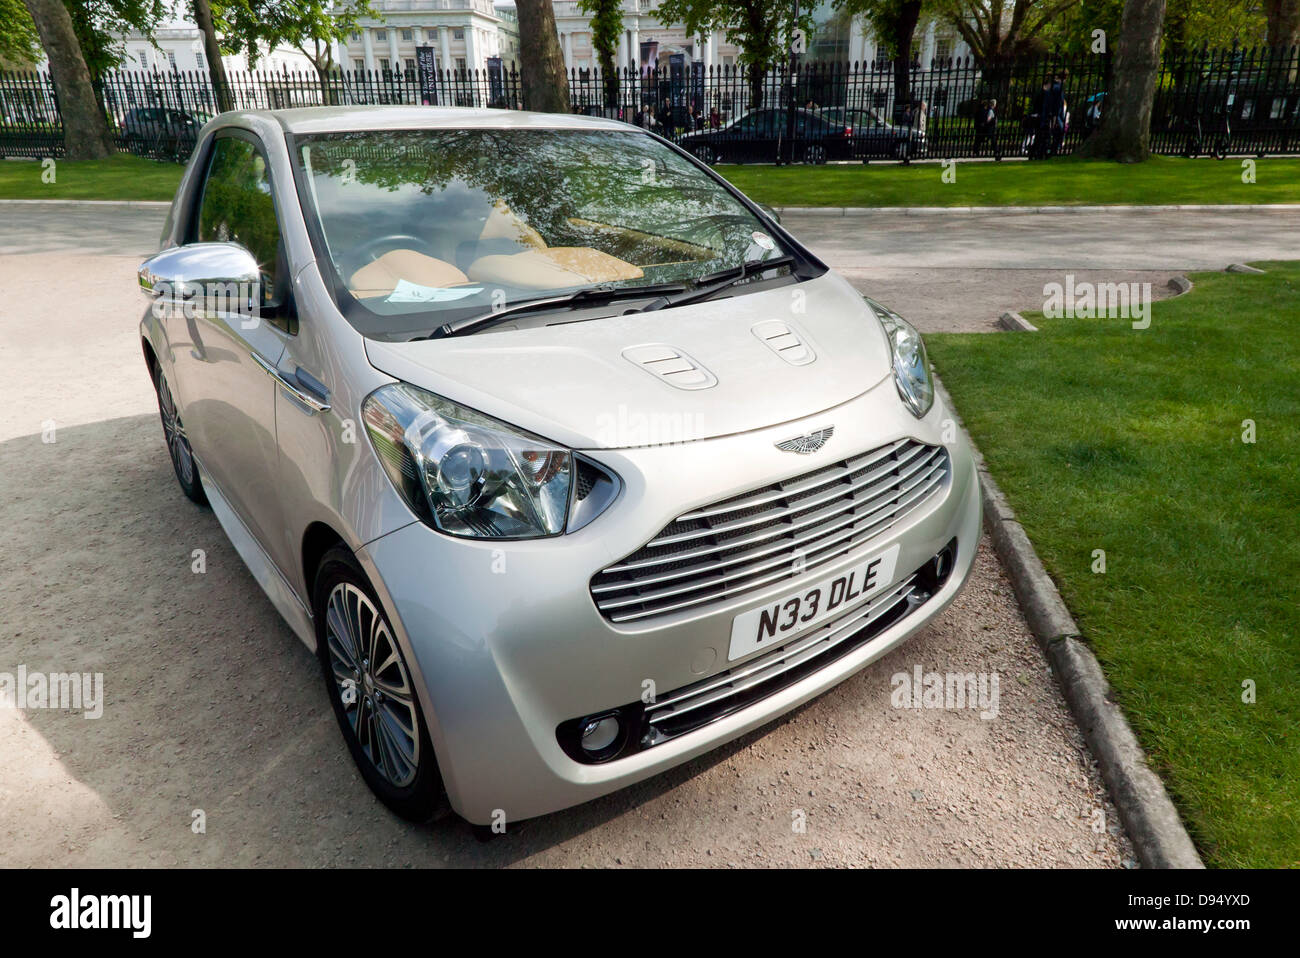 Aston Martin Cygnet  on display at the Old Royal Naval College, Greenwich. Stock Photo